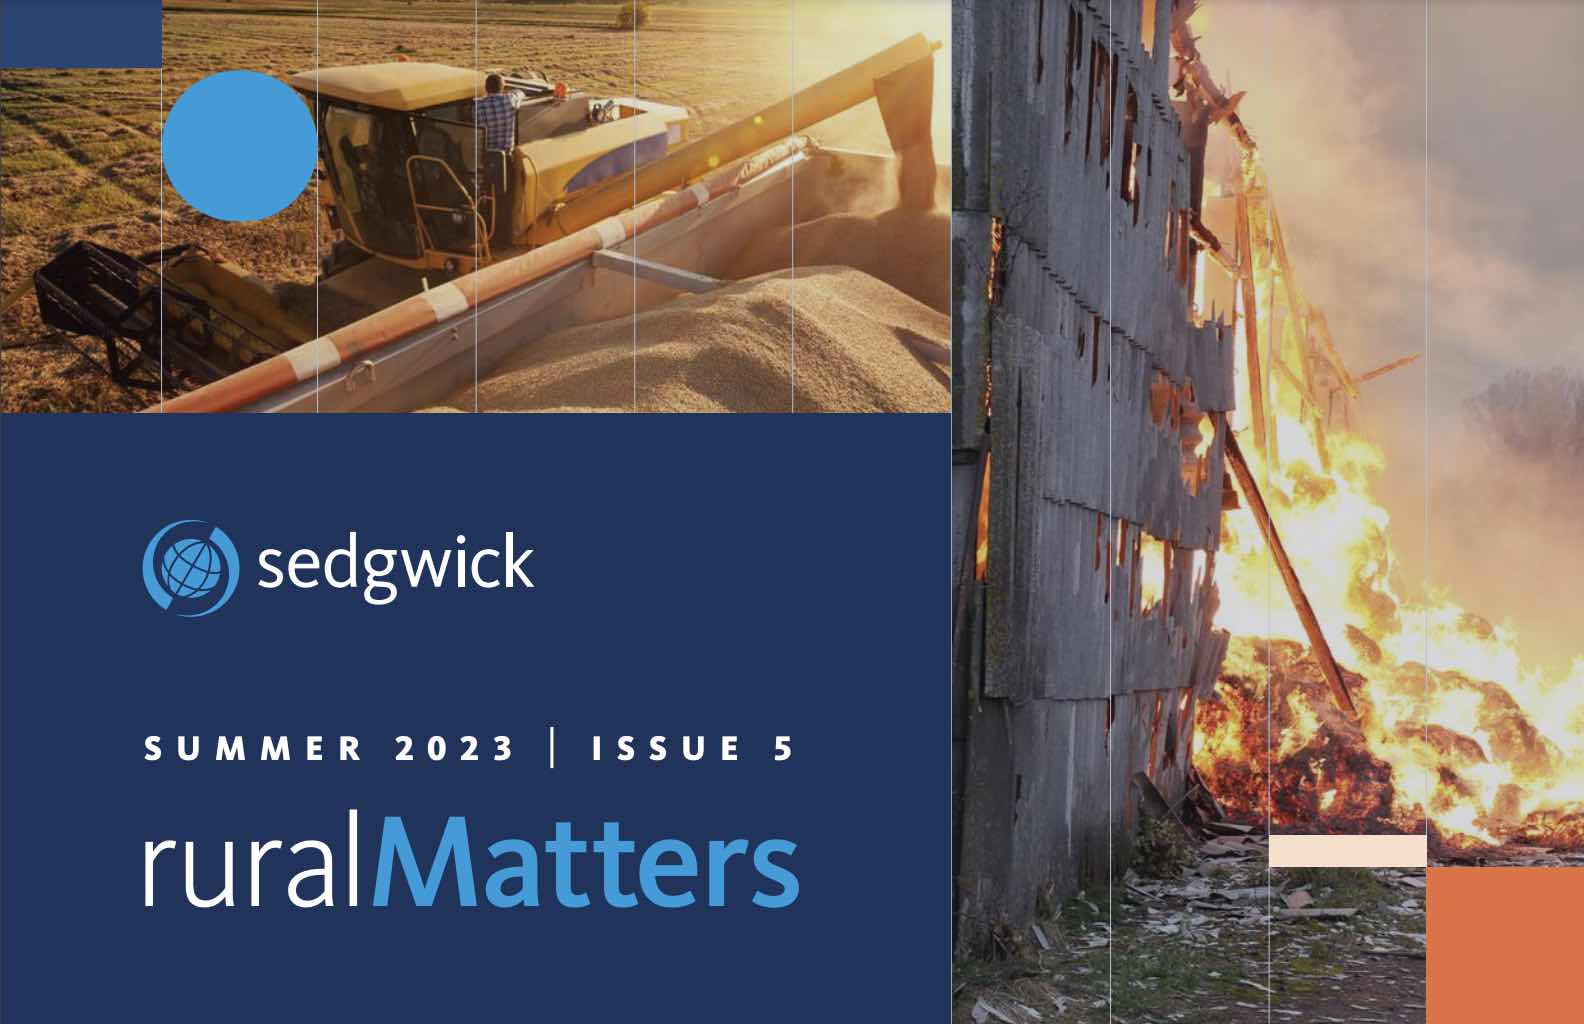 The cover of the Summer 2023 Issue 5 ruralMatters newsletter.